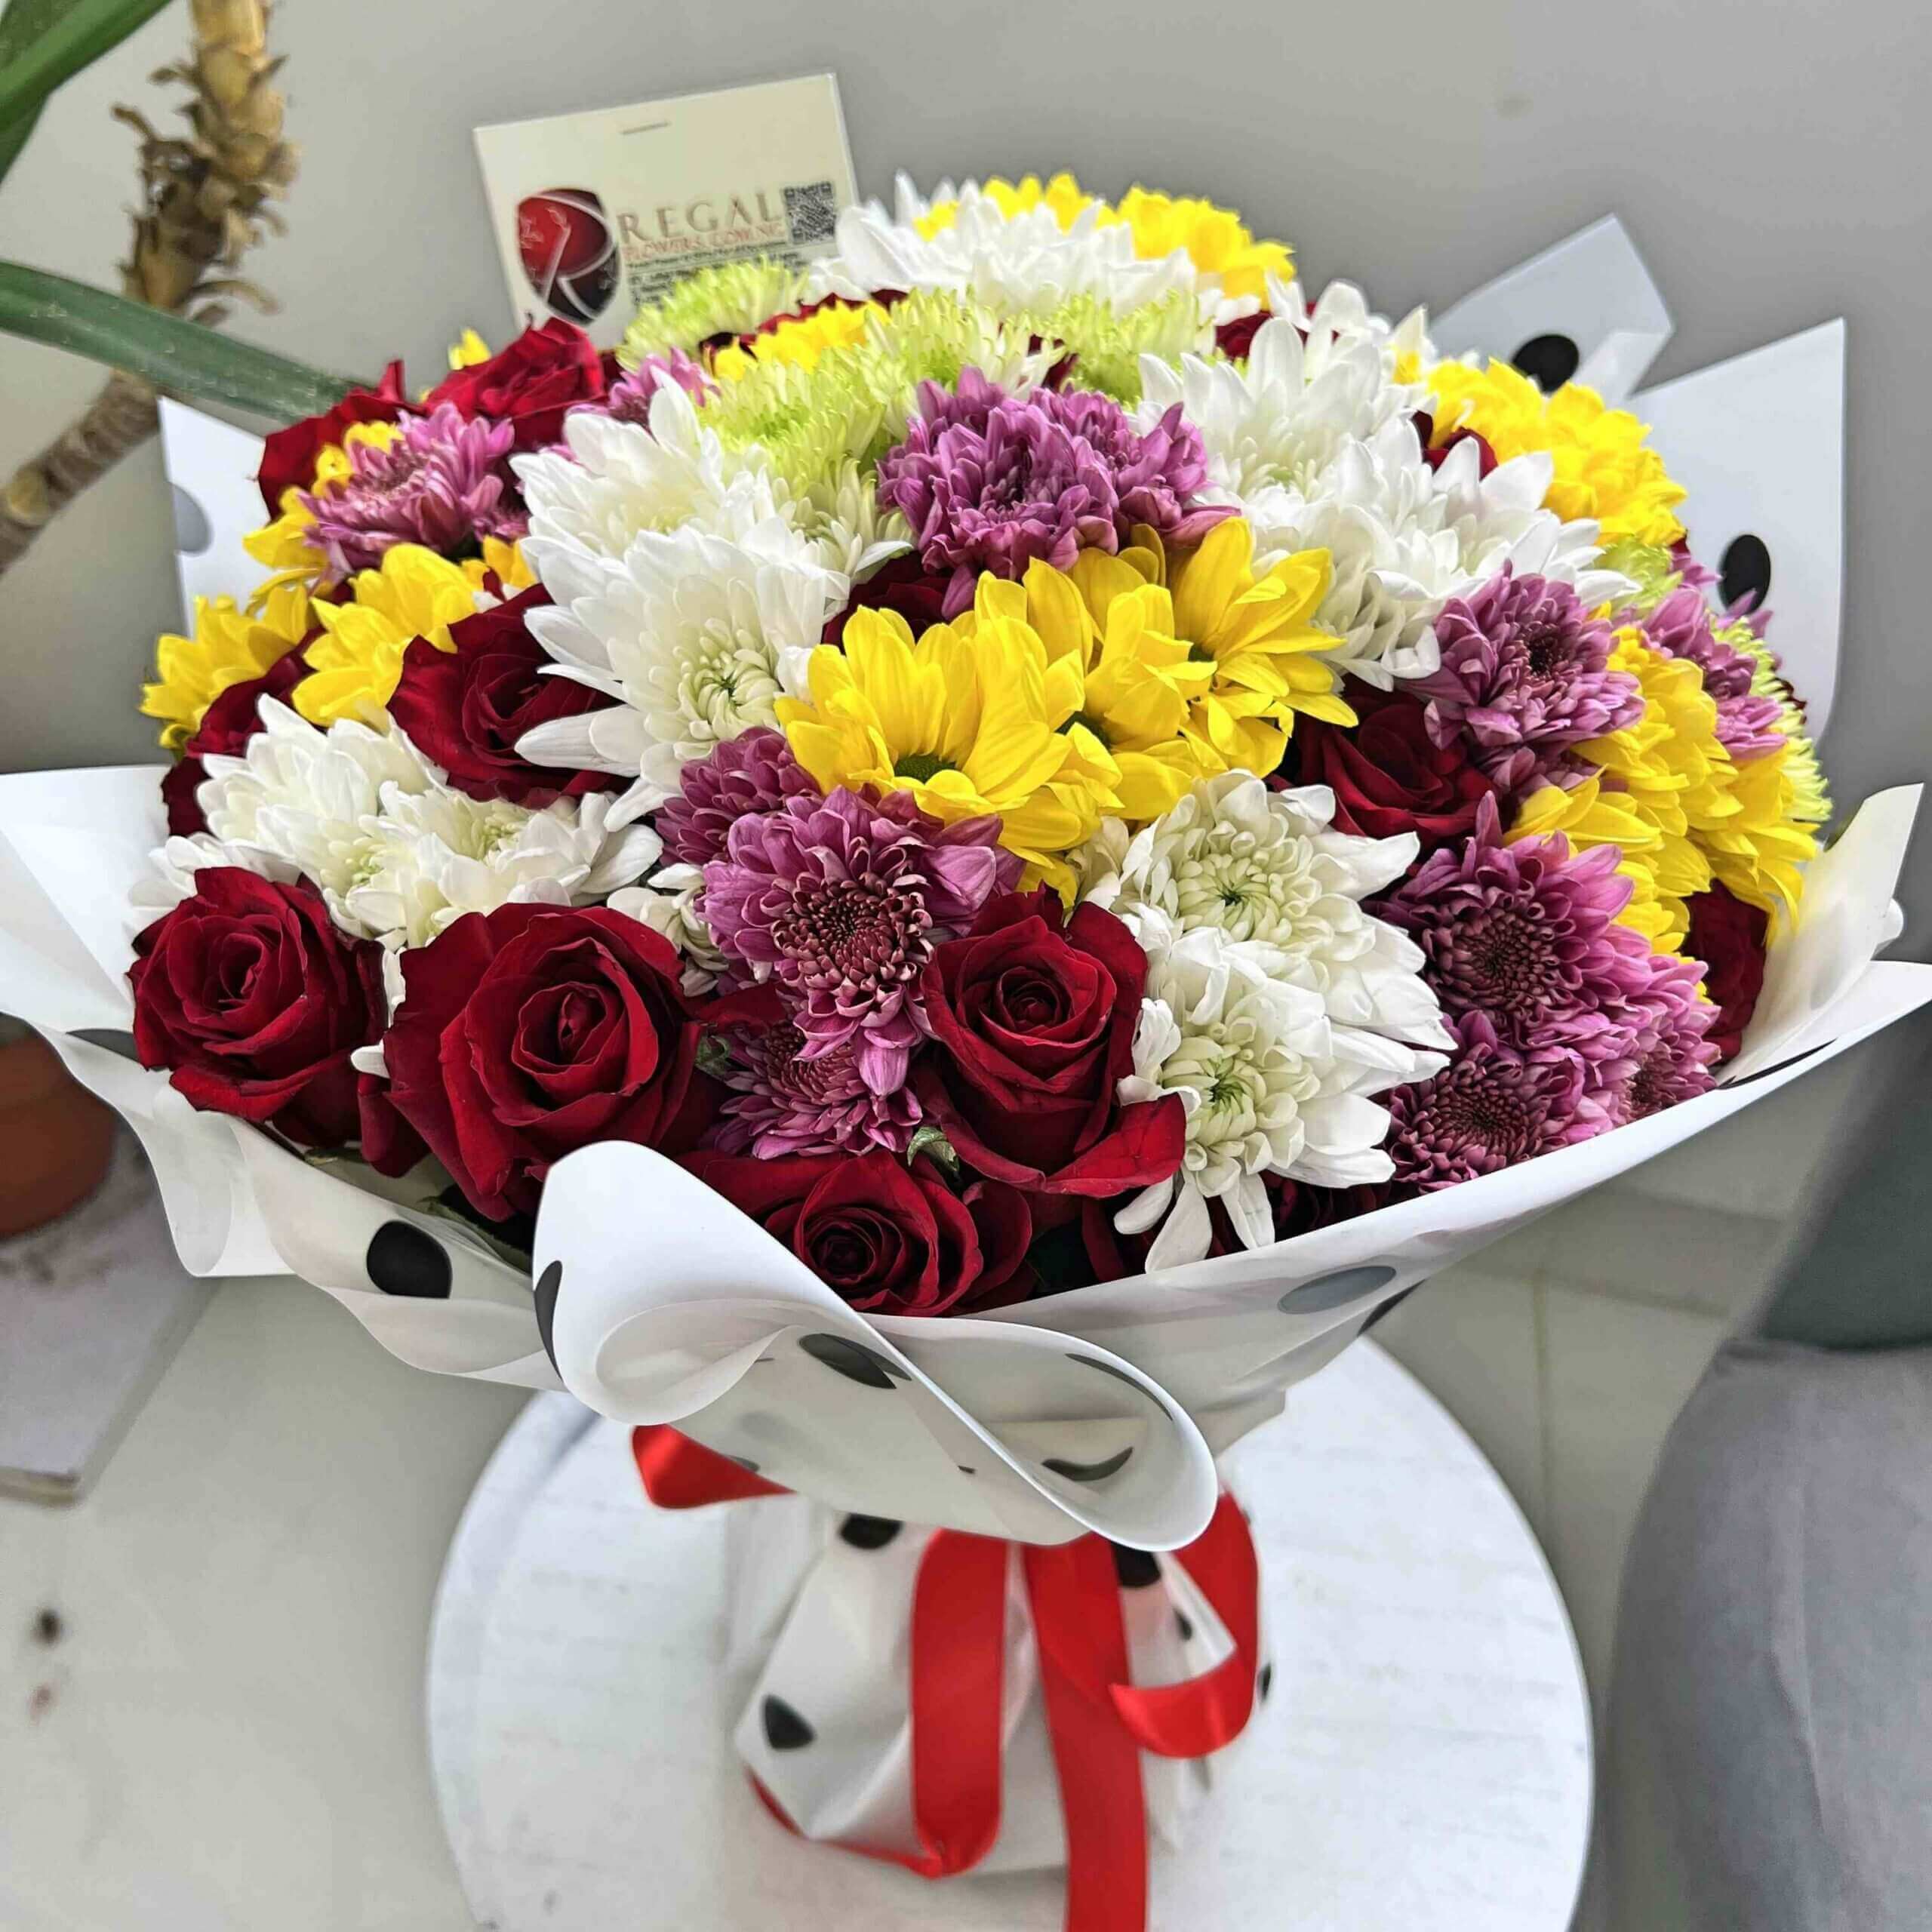 Regal Red roses and white chrysanthemus and Purple Chrysanthemums_11zon